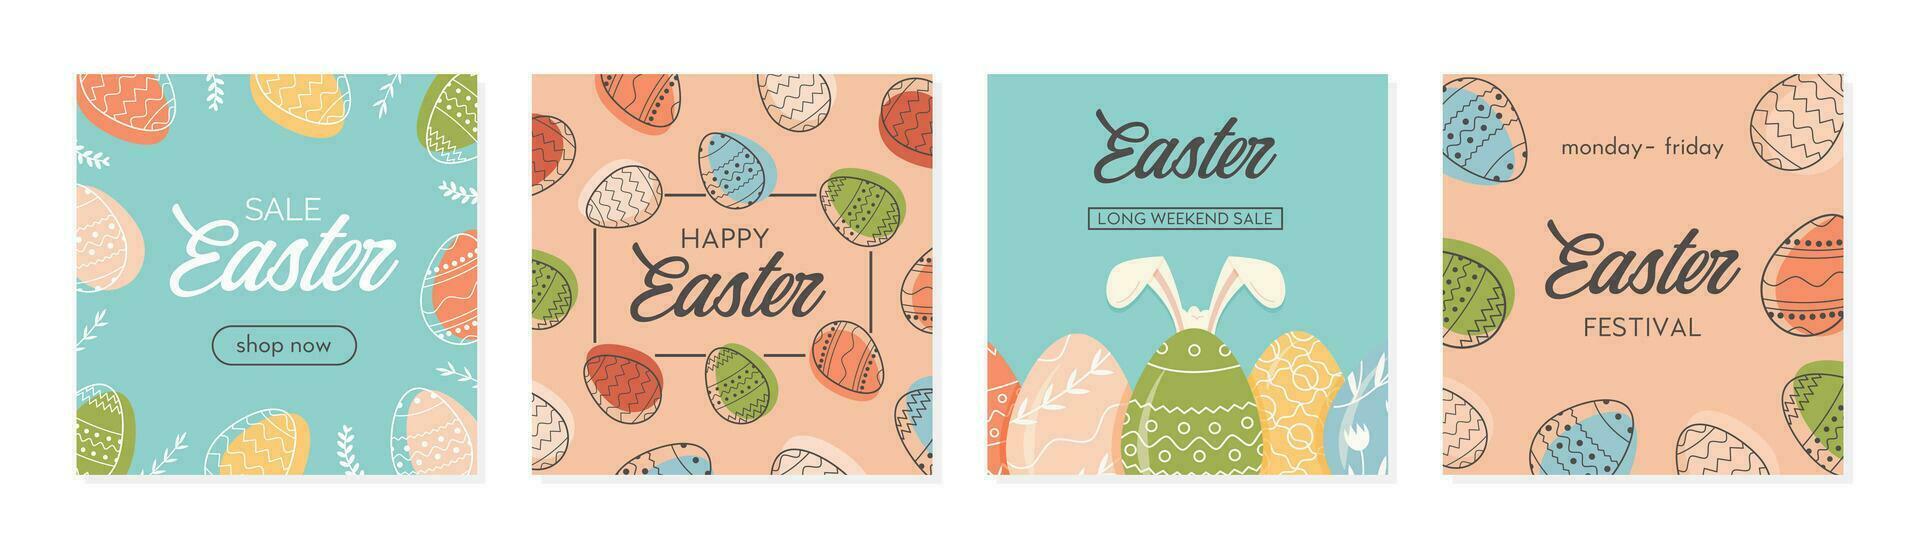 Happy Easter set of sale banners, greeting cards, posters, holiday covers or social media post. Trendy Easter square abstract templates. Modern art in minimalist style. Vector illustration.